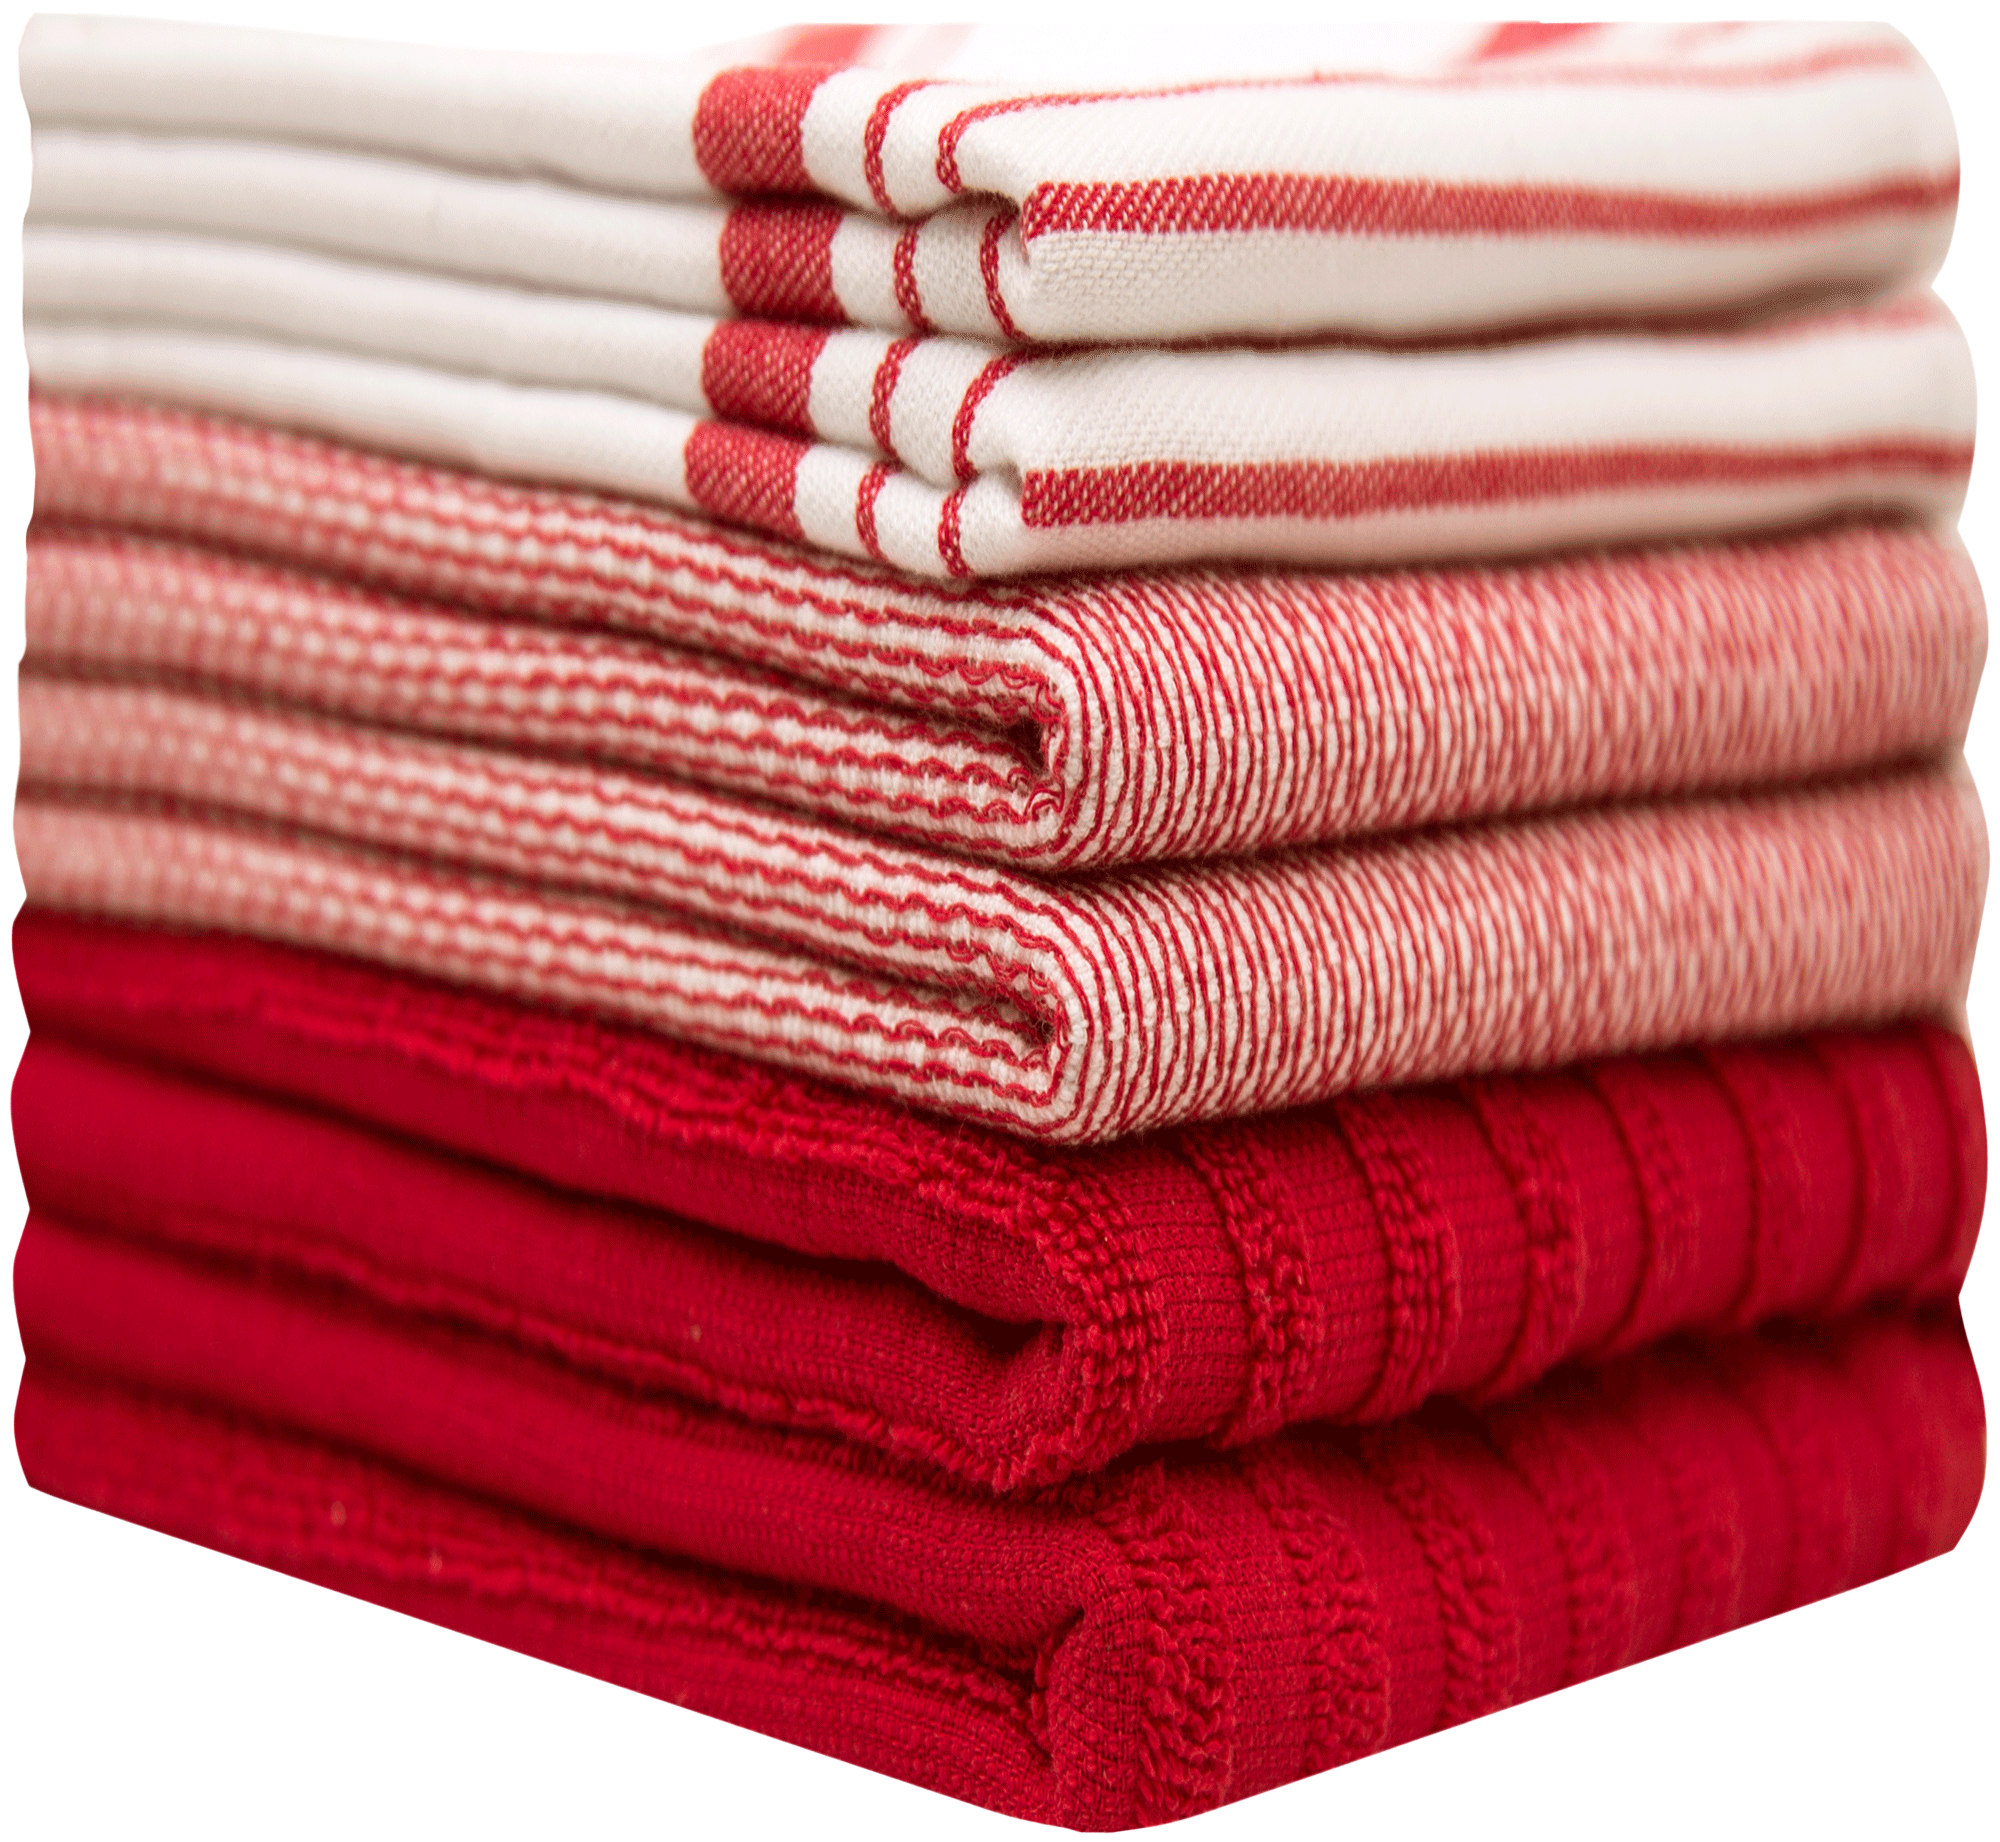 Shop Luxuriously Soft Flat Yarn Dyed Striped Kitchen Towels – Bumble Towels